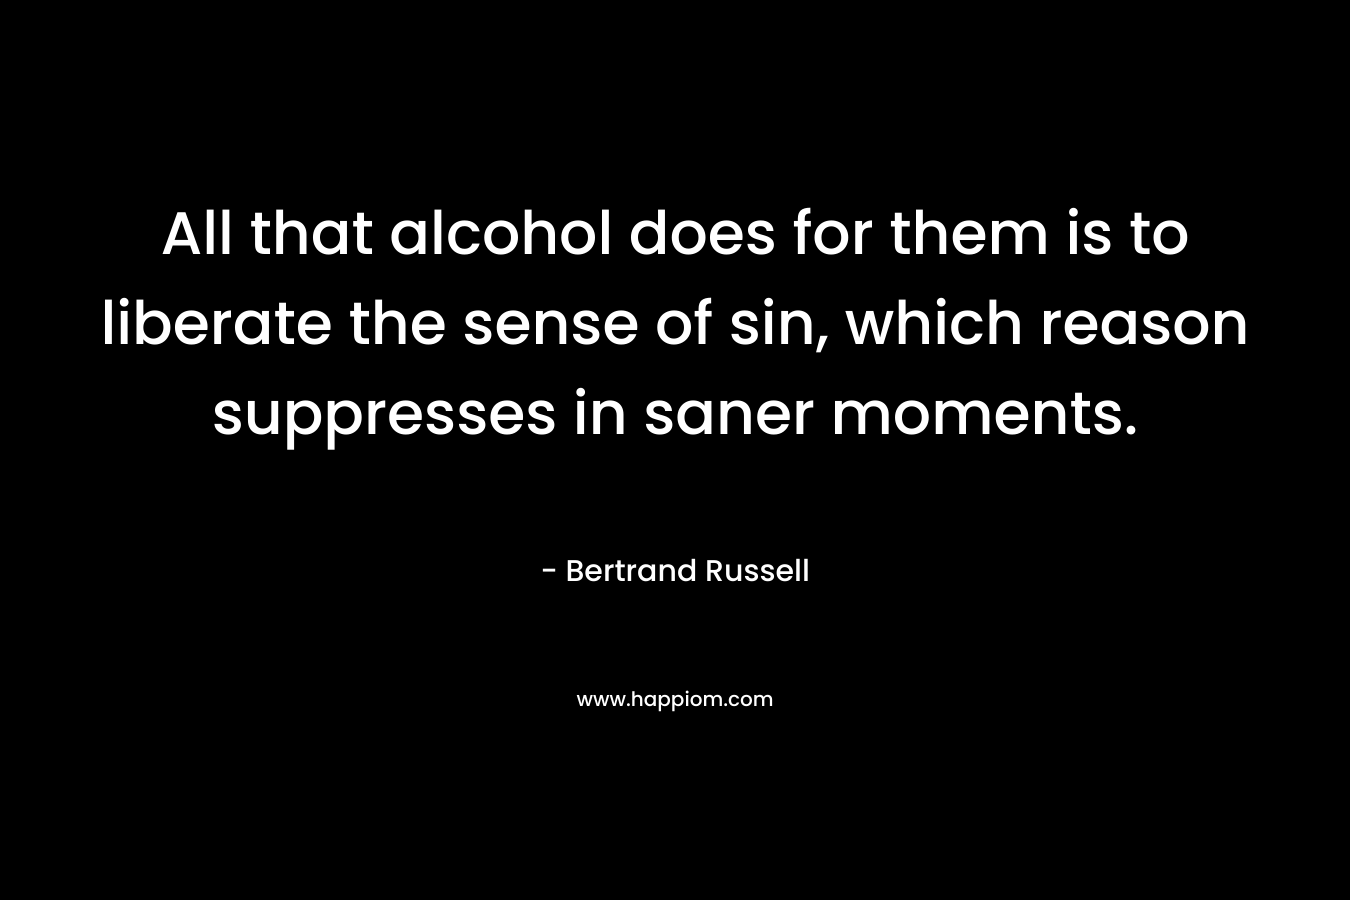 All that alcohol does for them is to liberate the sense of sin, which reason suppresses in saner moments. – Bertrand Russell